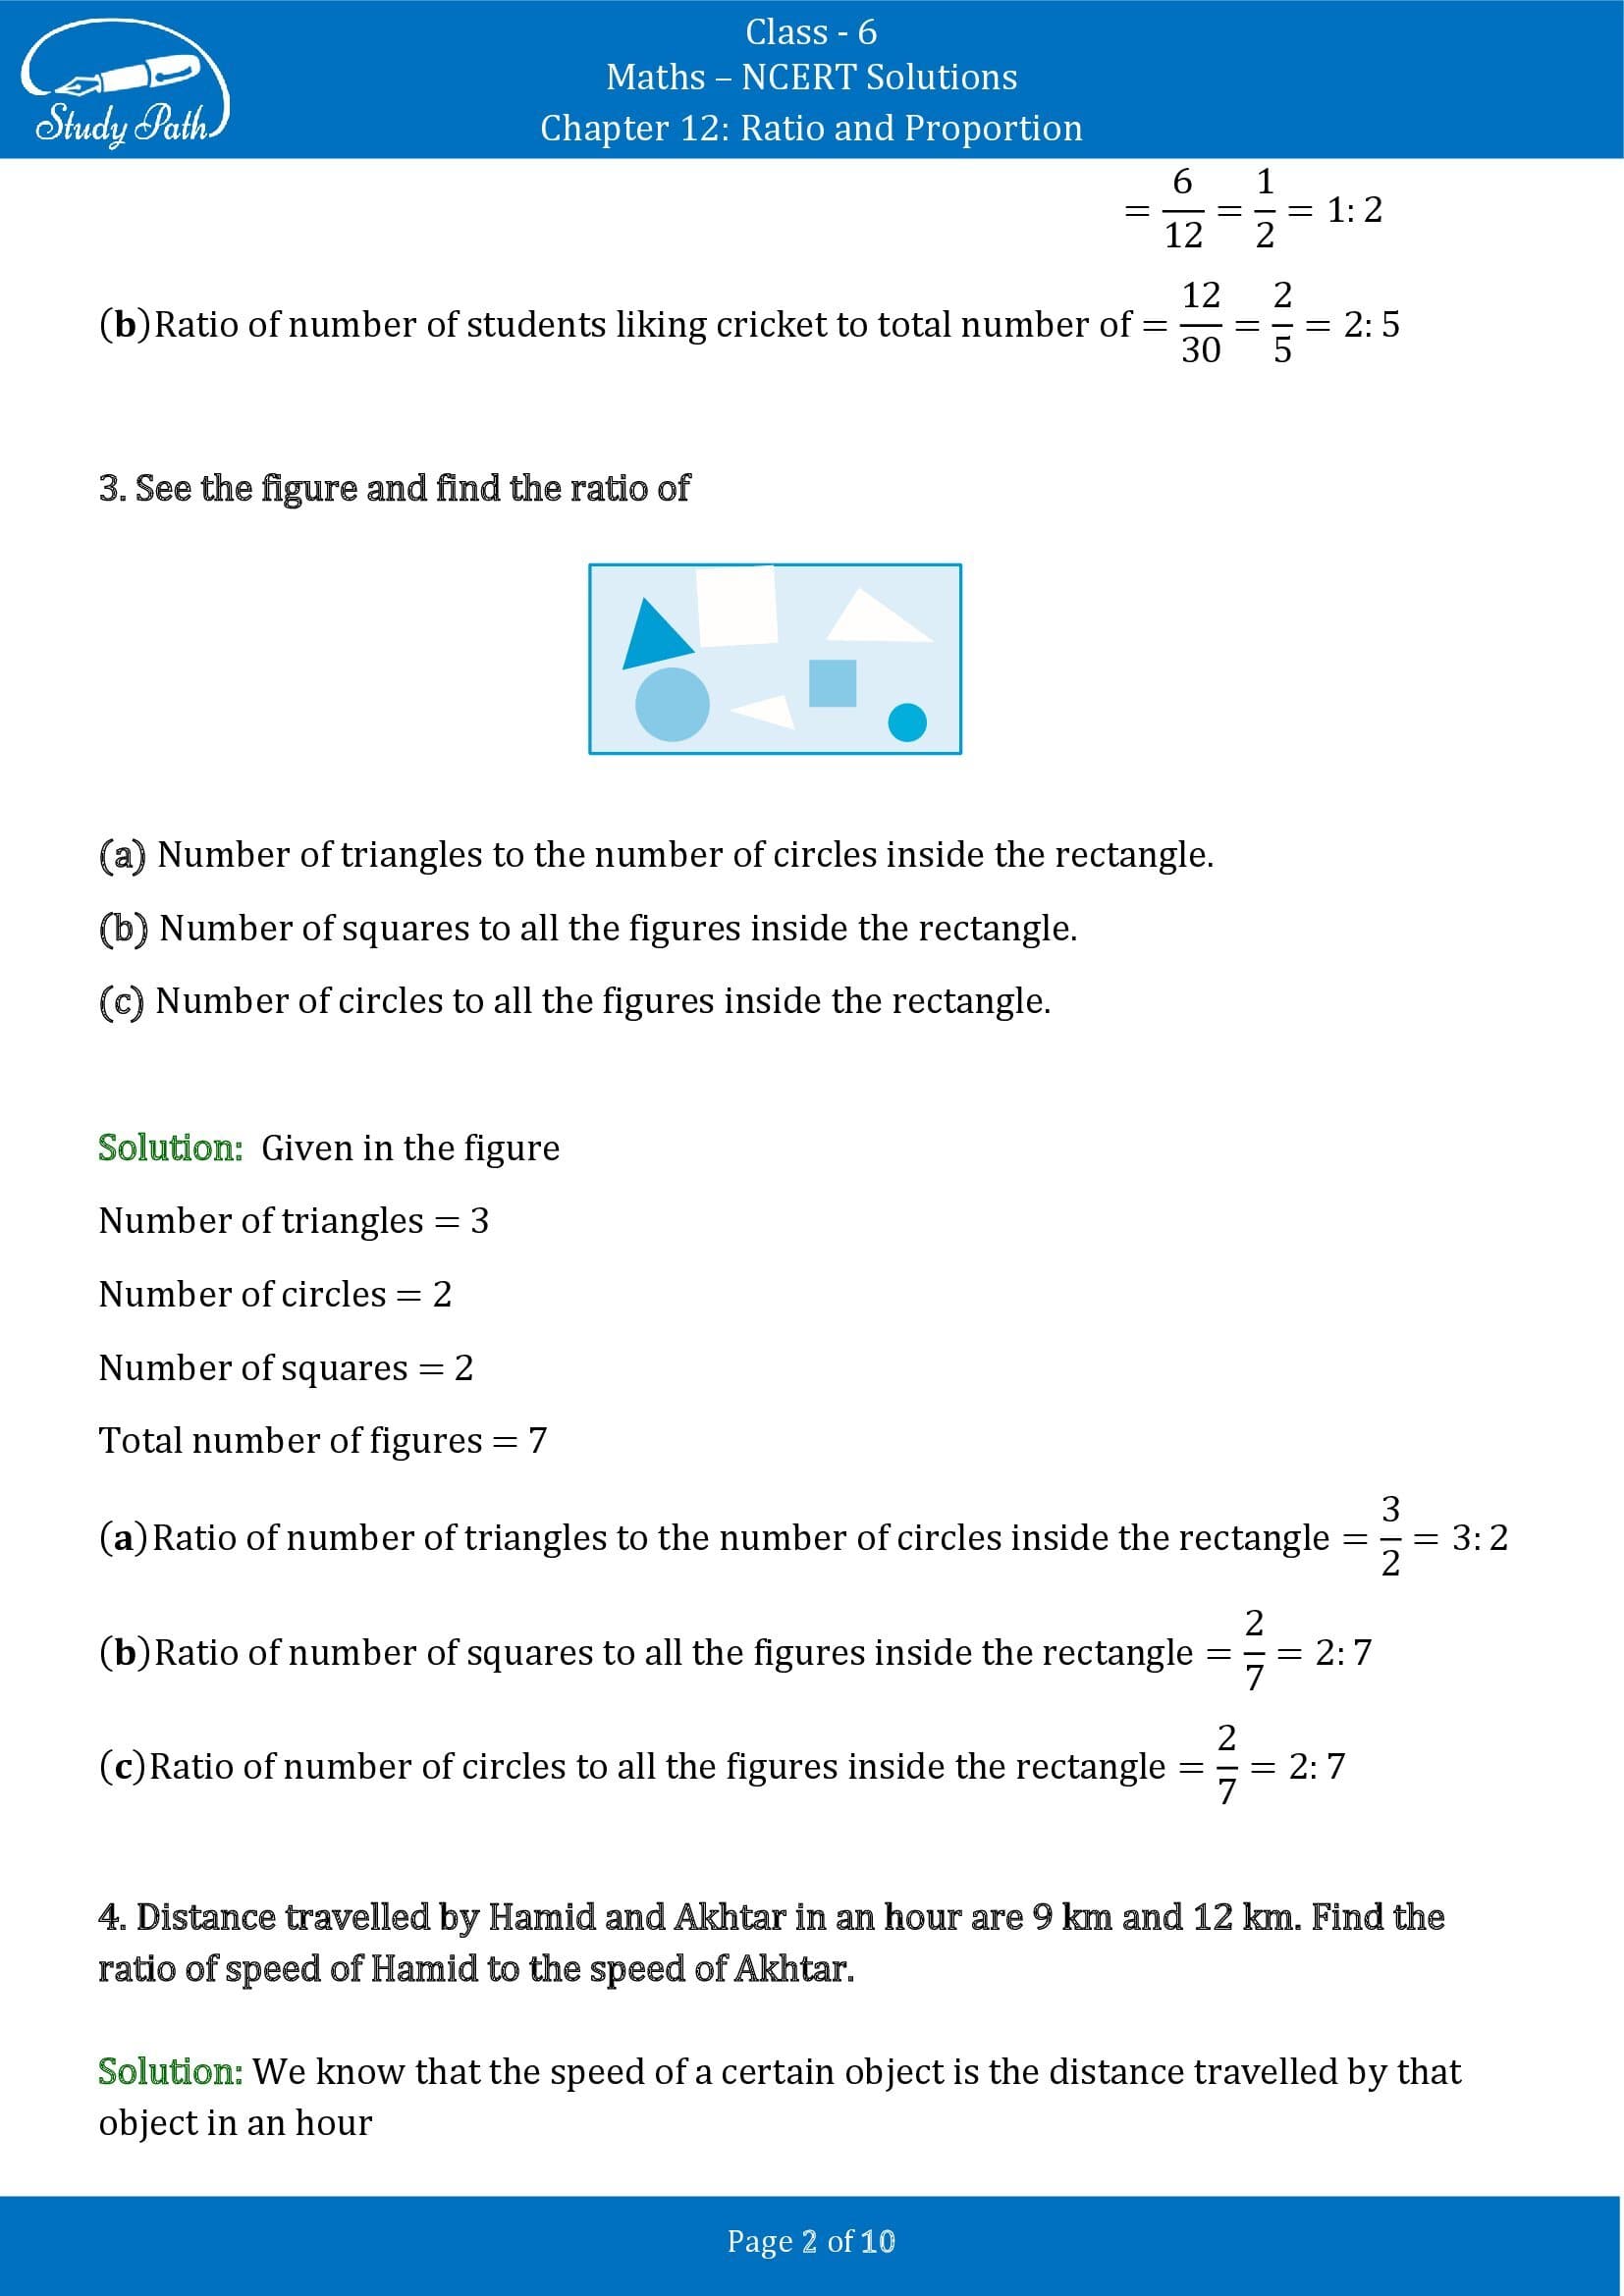 NCERT Solutions for Class 6 Maths Chapter 12 Ratio and Proportion Exercise 12.1 00002